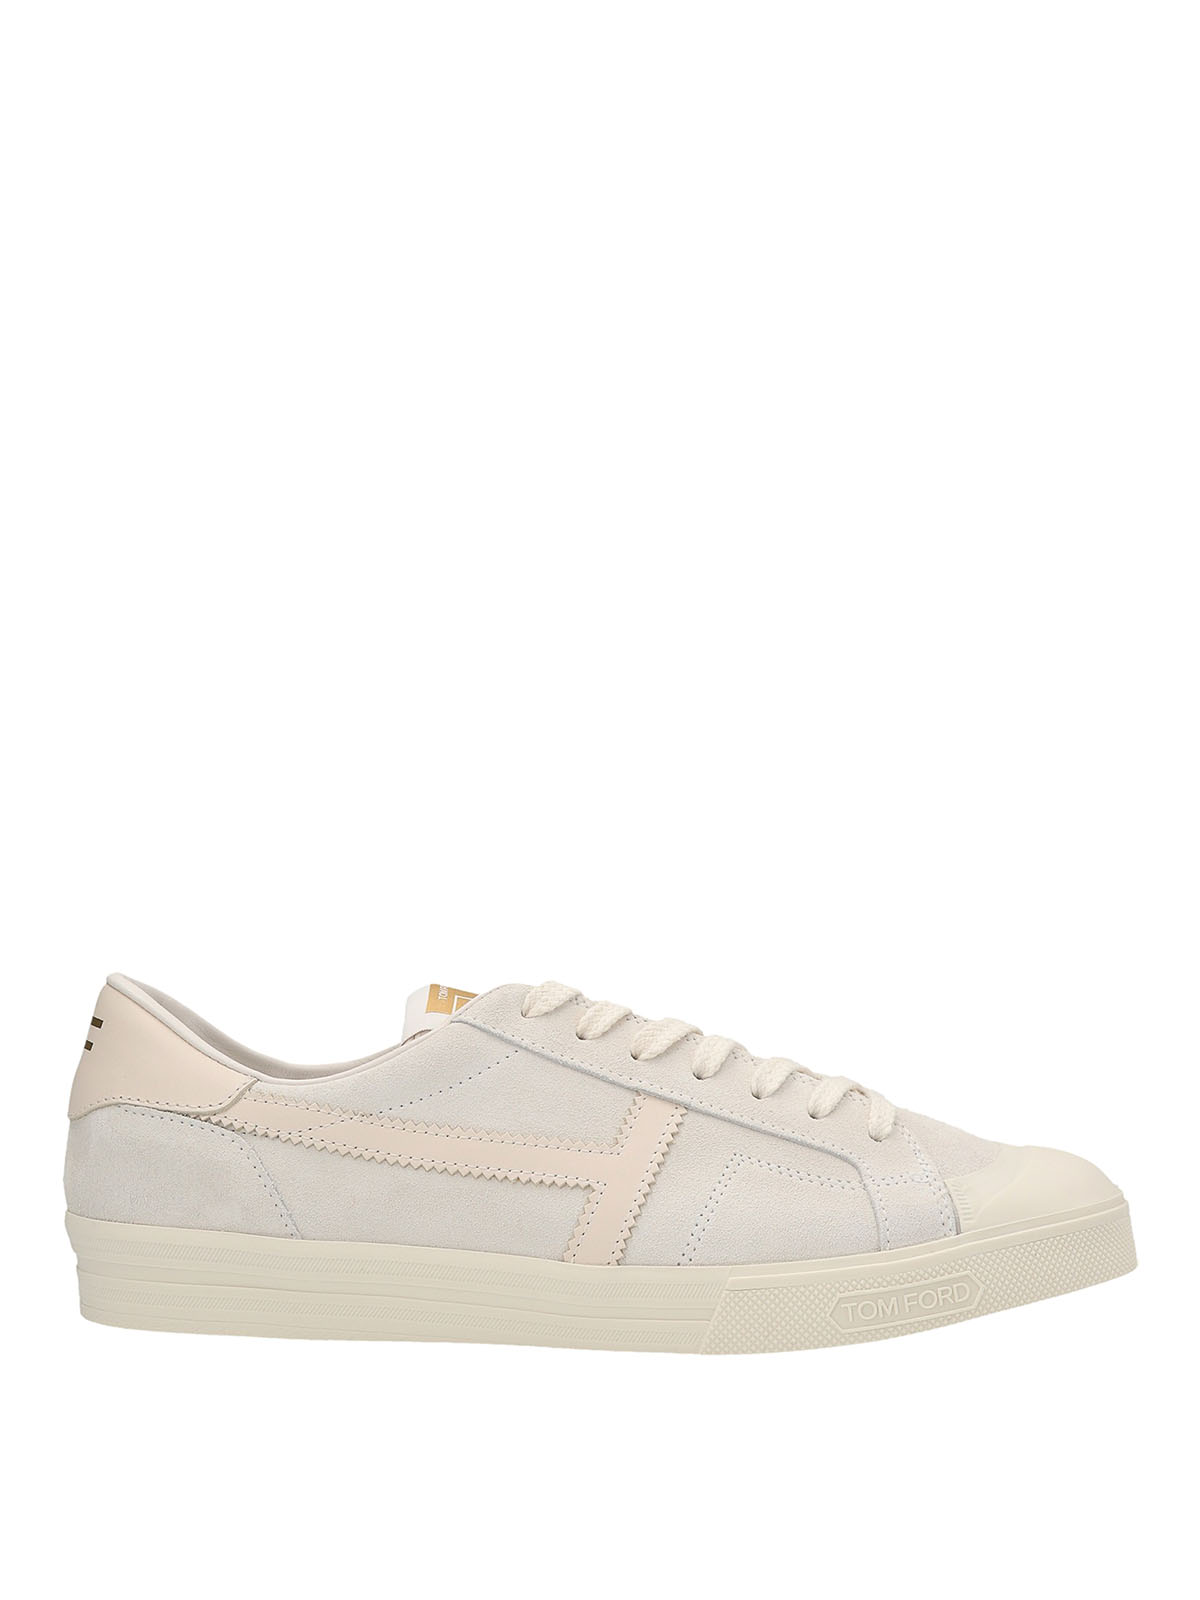 TOM FORD JARVIS SNEAKERS